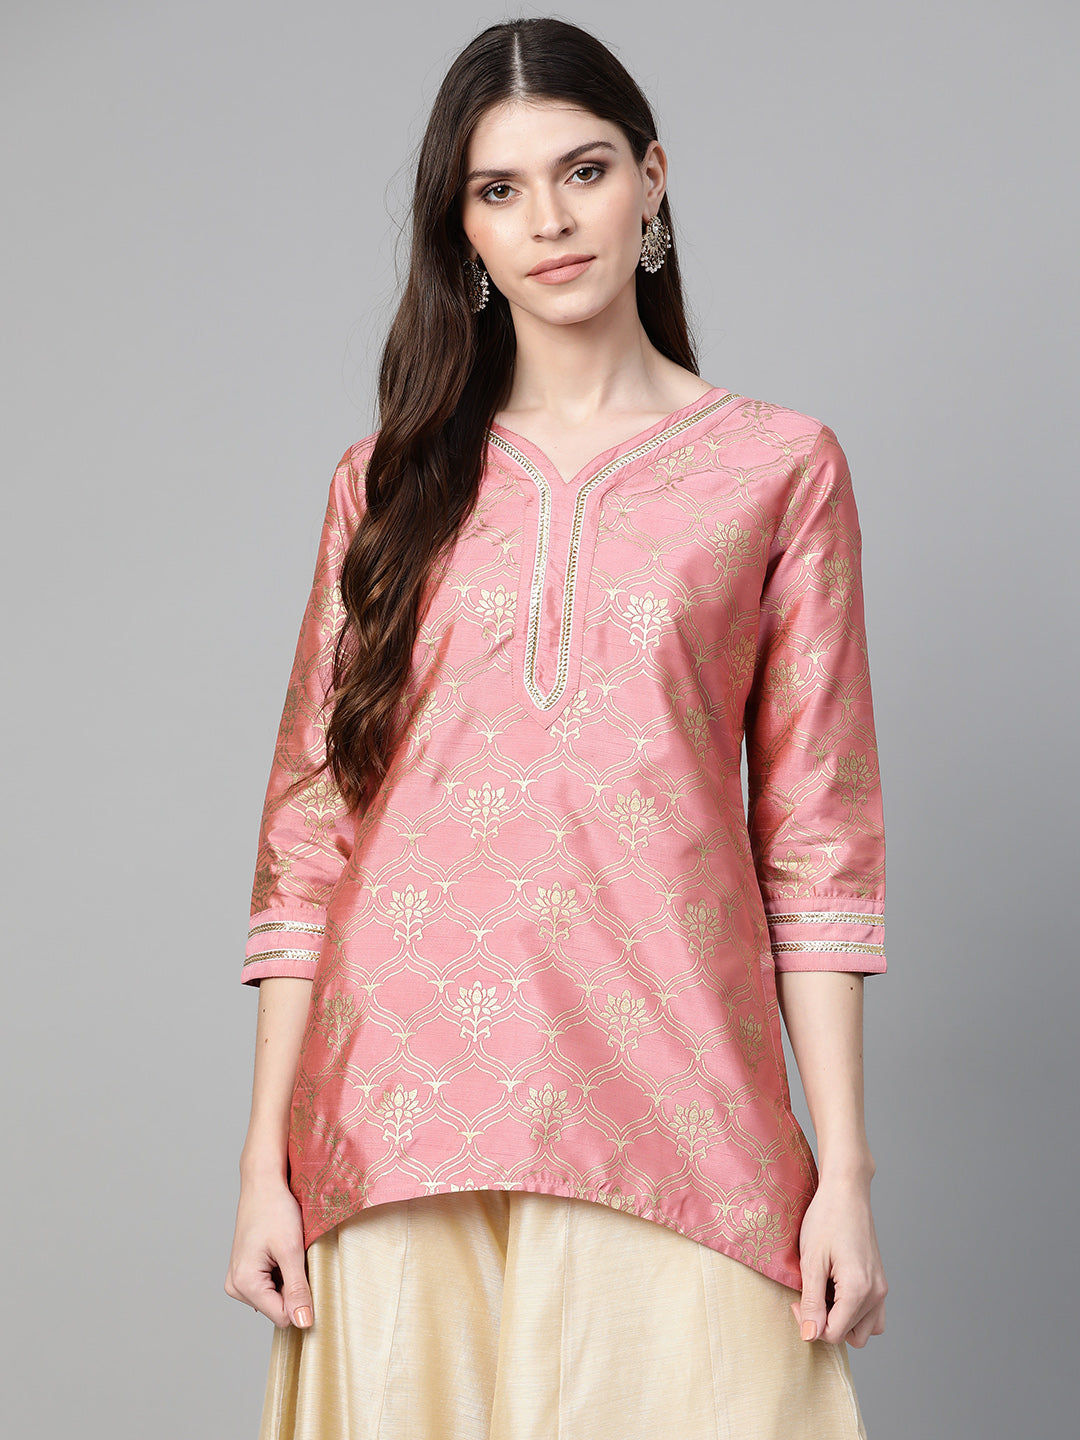 Bhama Couture Pink & Golden Printed Asymmetric Tunic